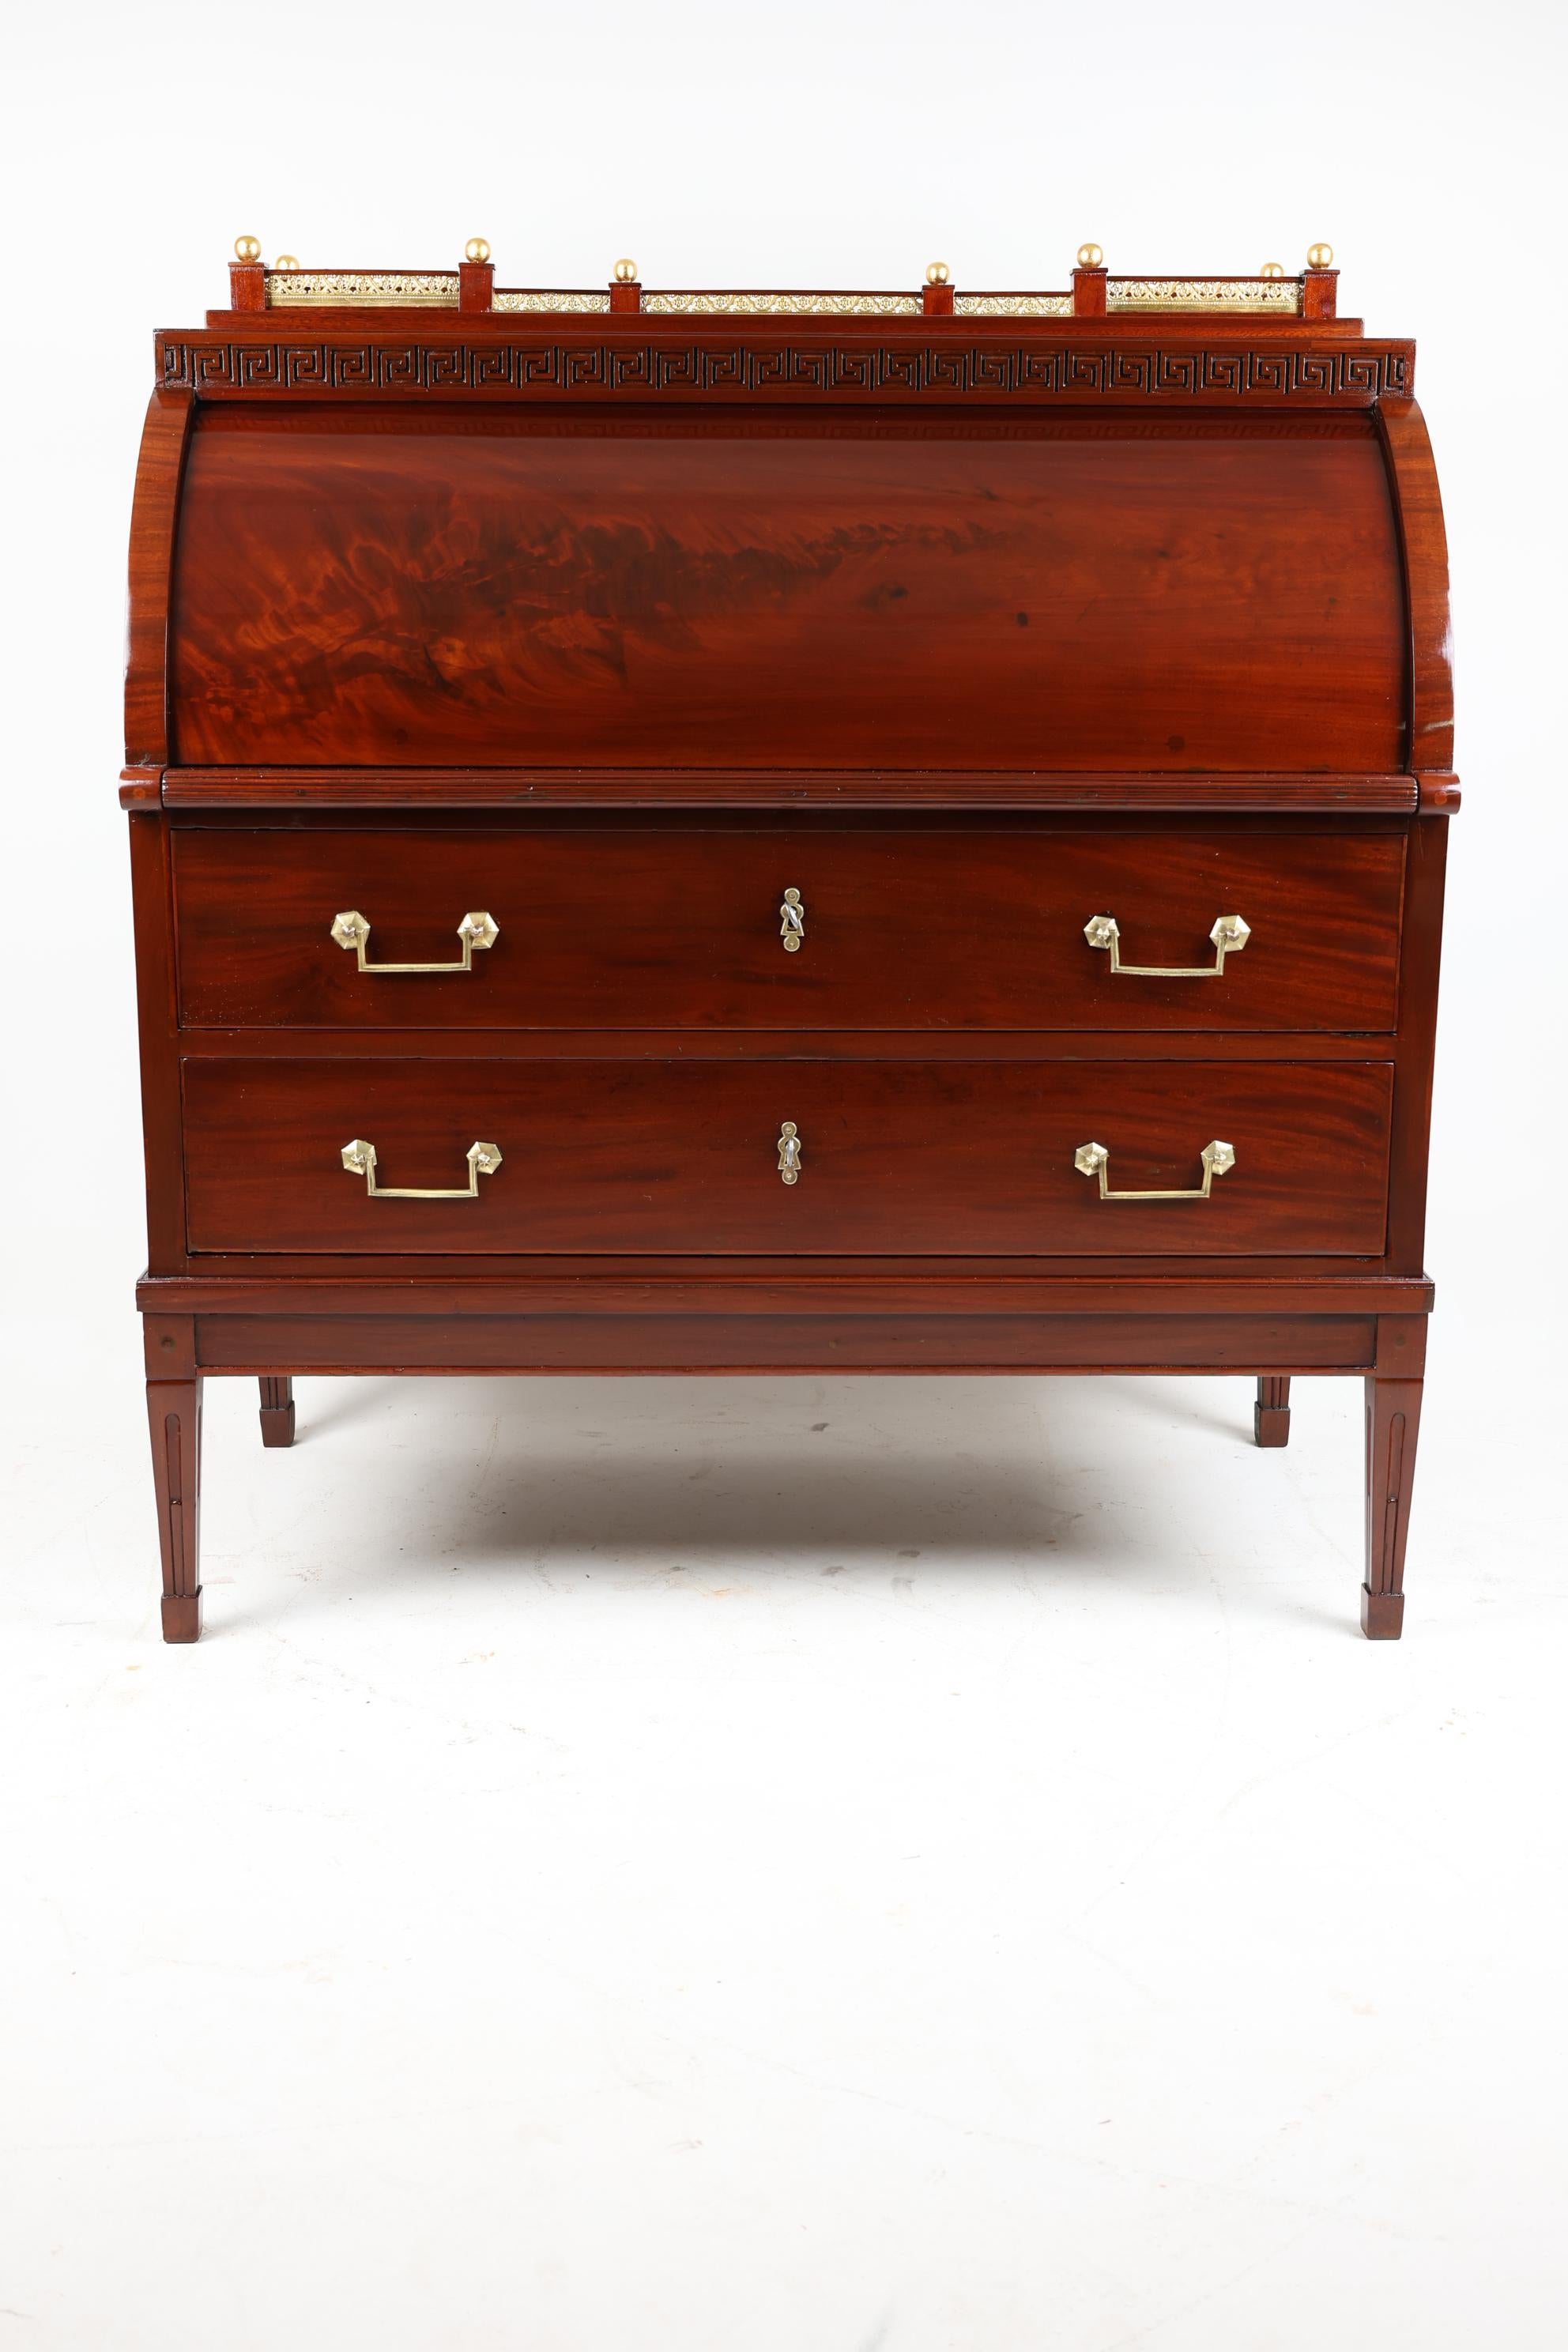 Early XIX Century Mahogany Secretary
Germany, 1800
Mahogany

This classicist cylinder bureau made of mahogany dates from 1810 and is an original from the Empire & Biedermeier era. The secretary is 109 cm wide, 60 cm long and 120 cm high. The color